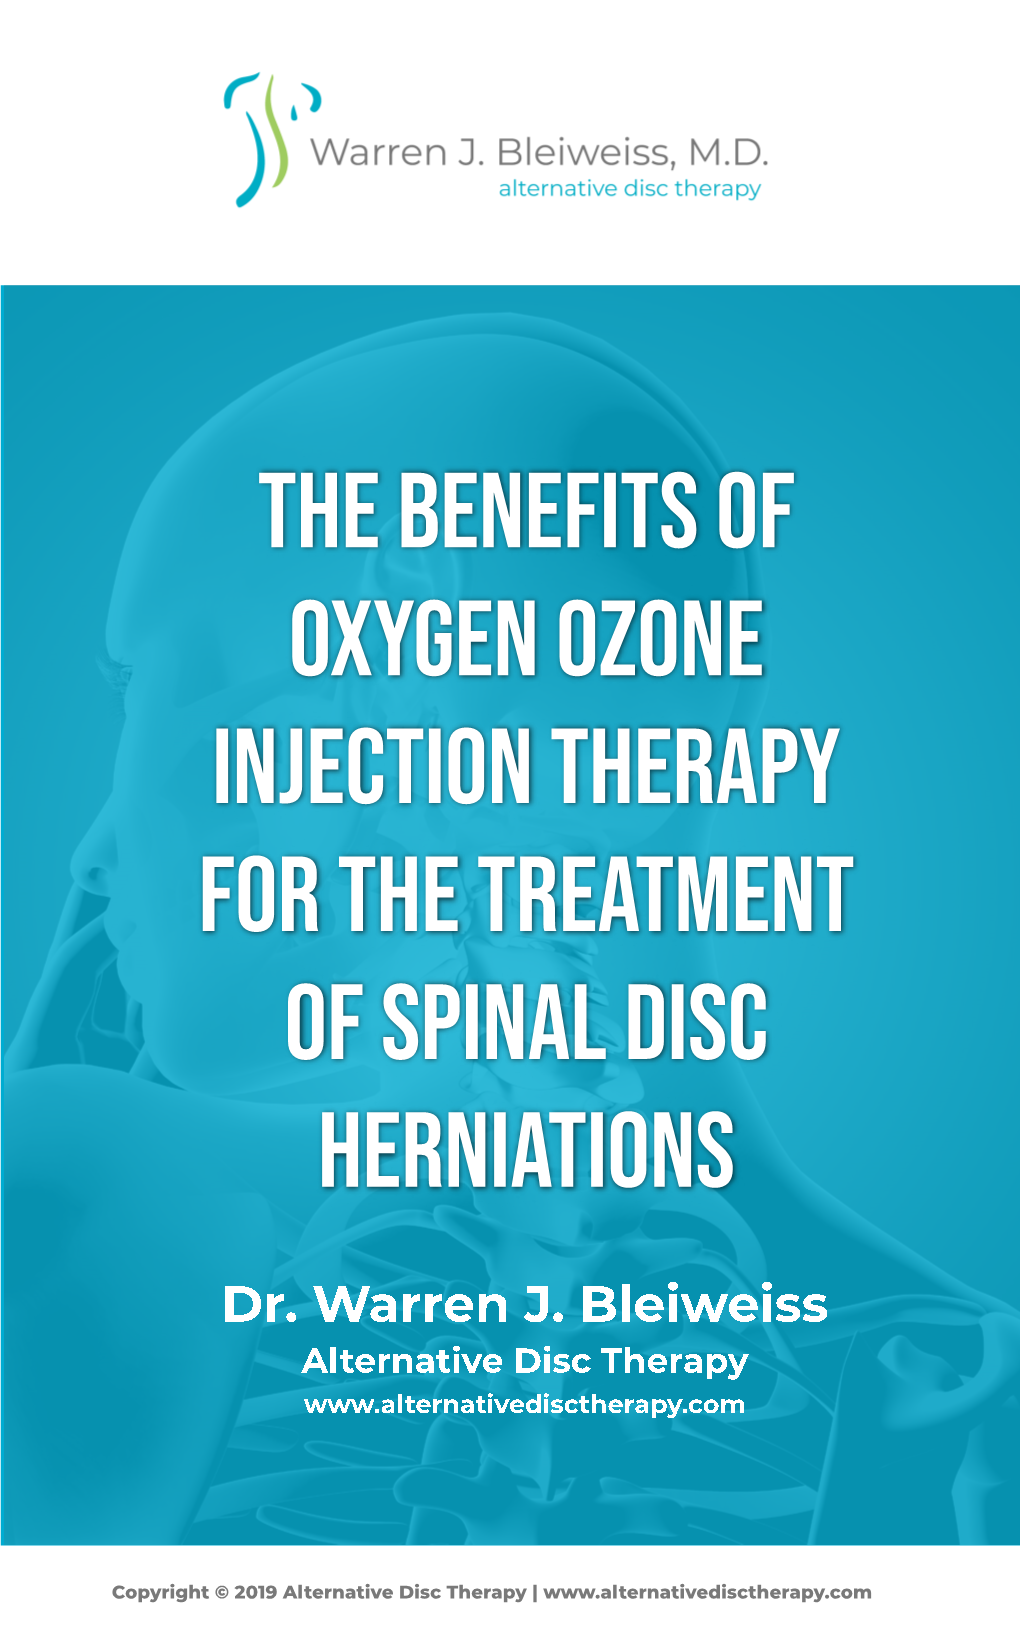 The Benefits of Oxygen Ozone Injection Therapy for the Treatment of Spinal Disc Herniations